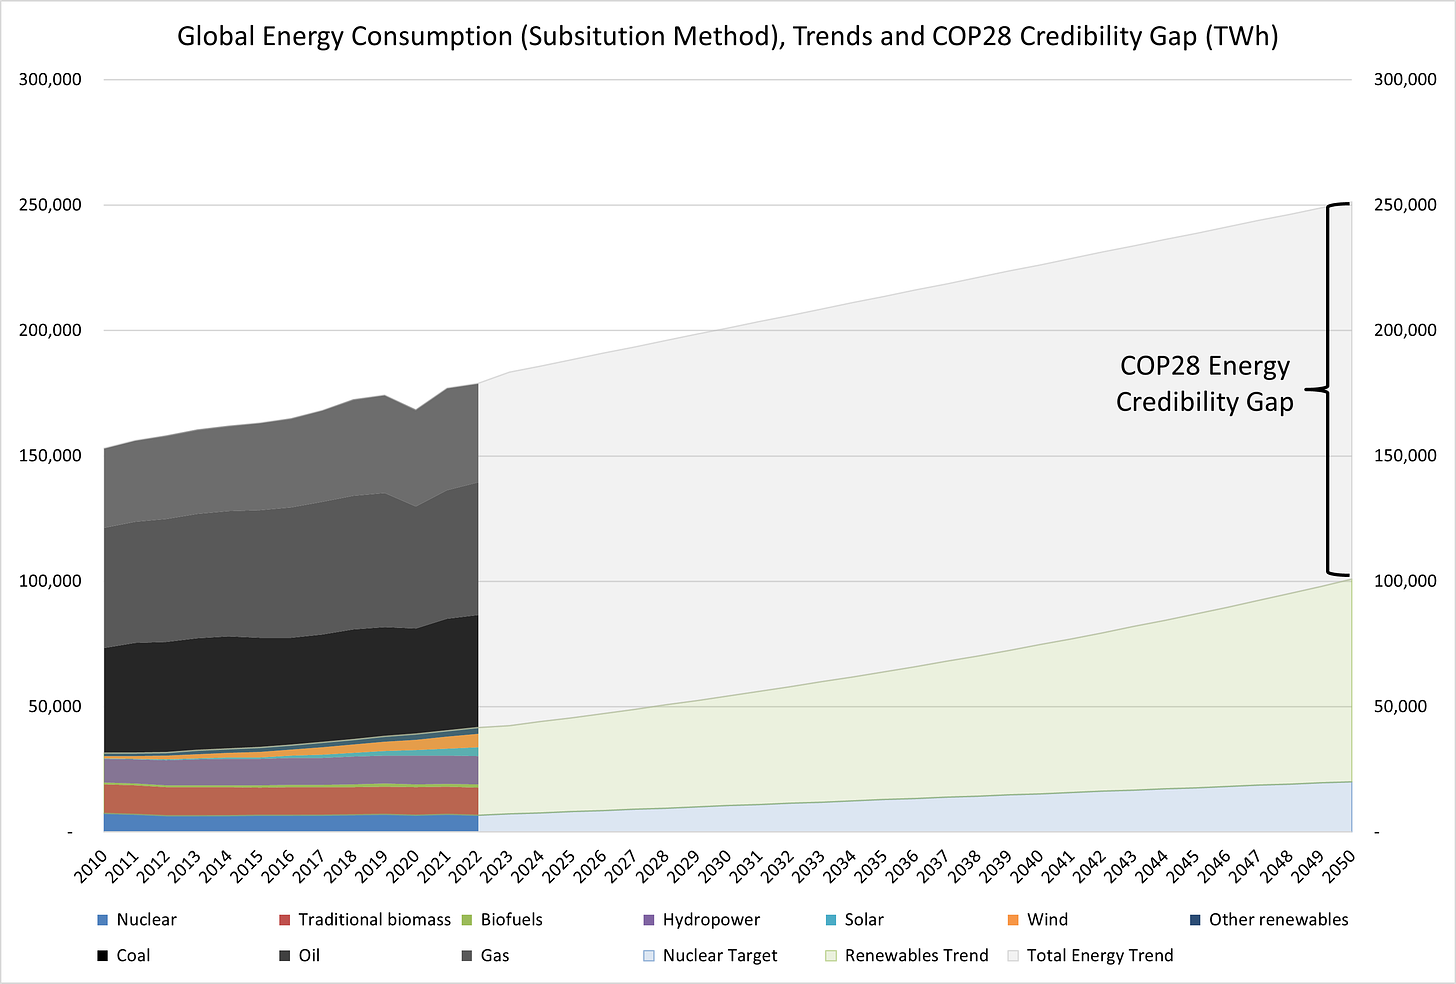 Global Primary Energy Trends and COP28 Energy Credibility Gap (TWh)